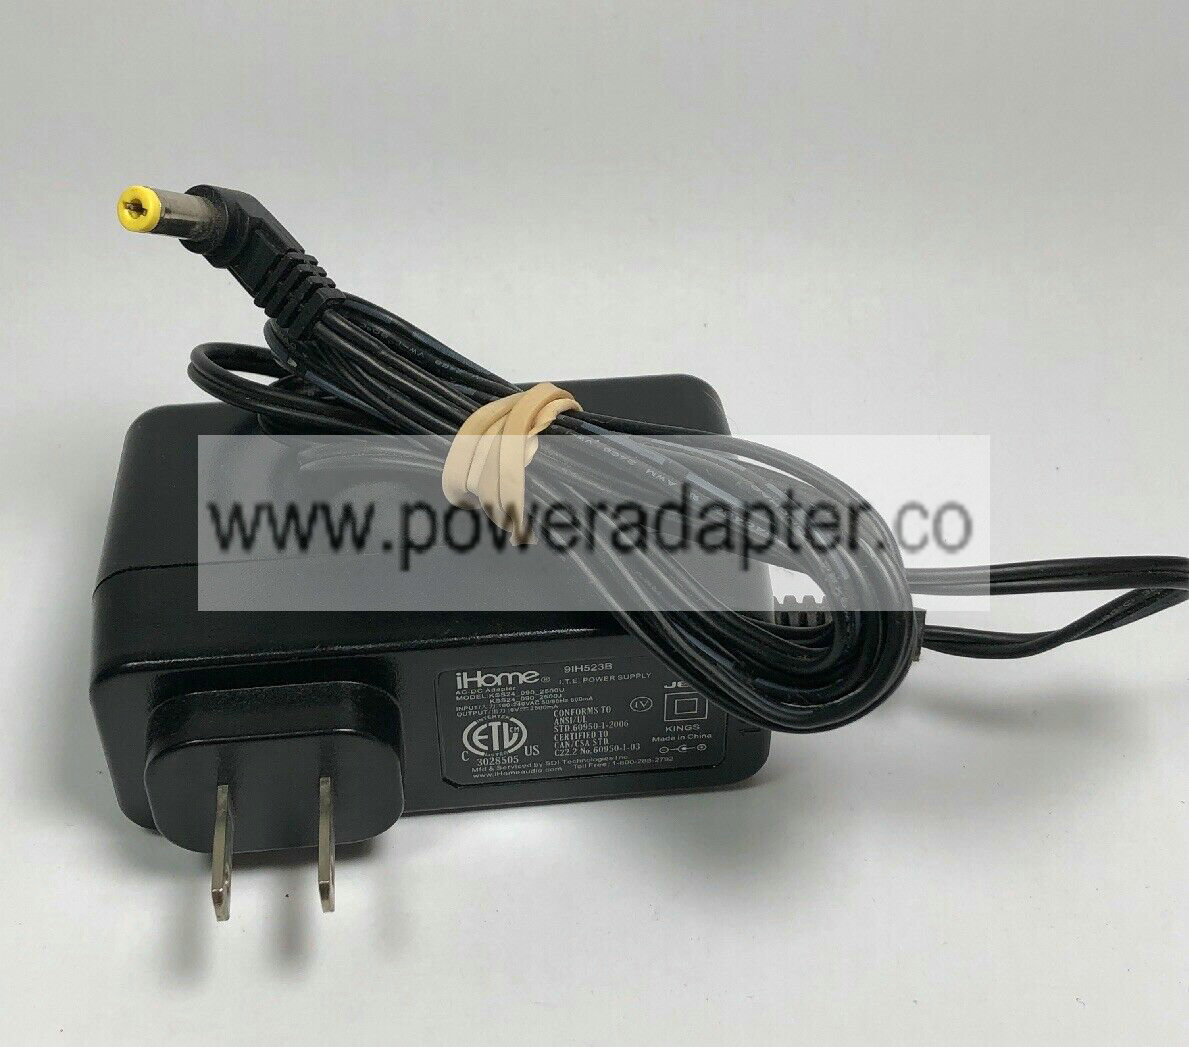 iHome AC-DC Adapter For iP88 9IH523B 9v 2500mA Model KSS24-090-2500U Type: AC/DC Adapter Output Voltage: 9 V MPN: Do